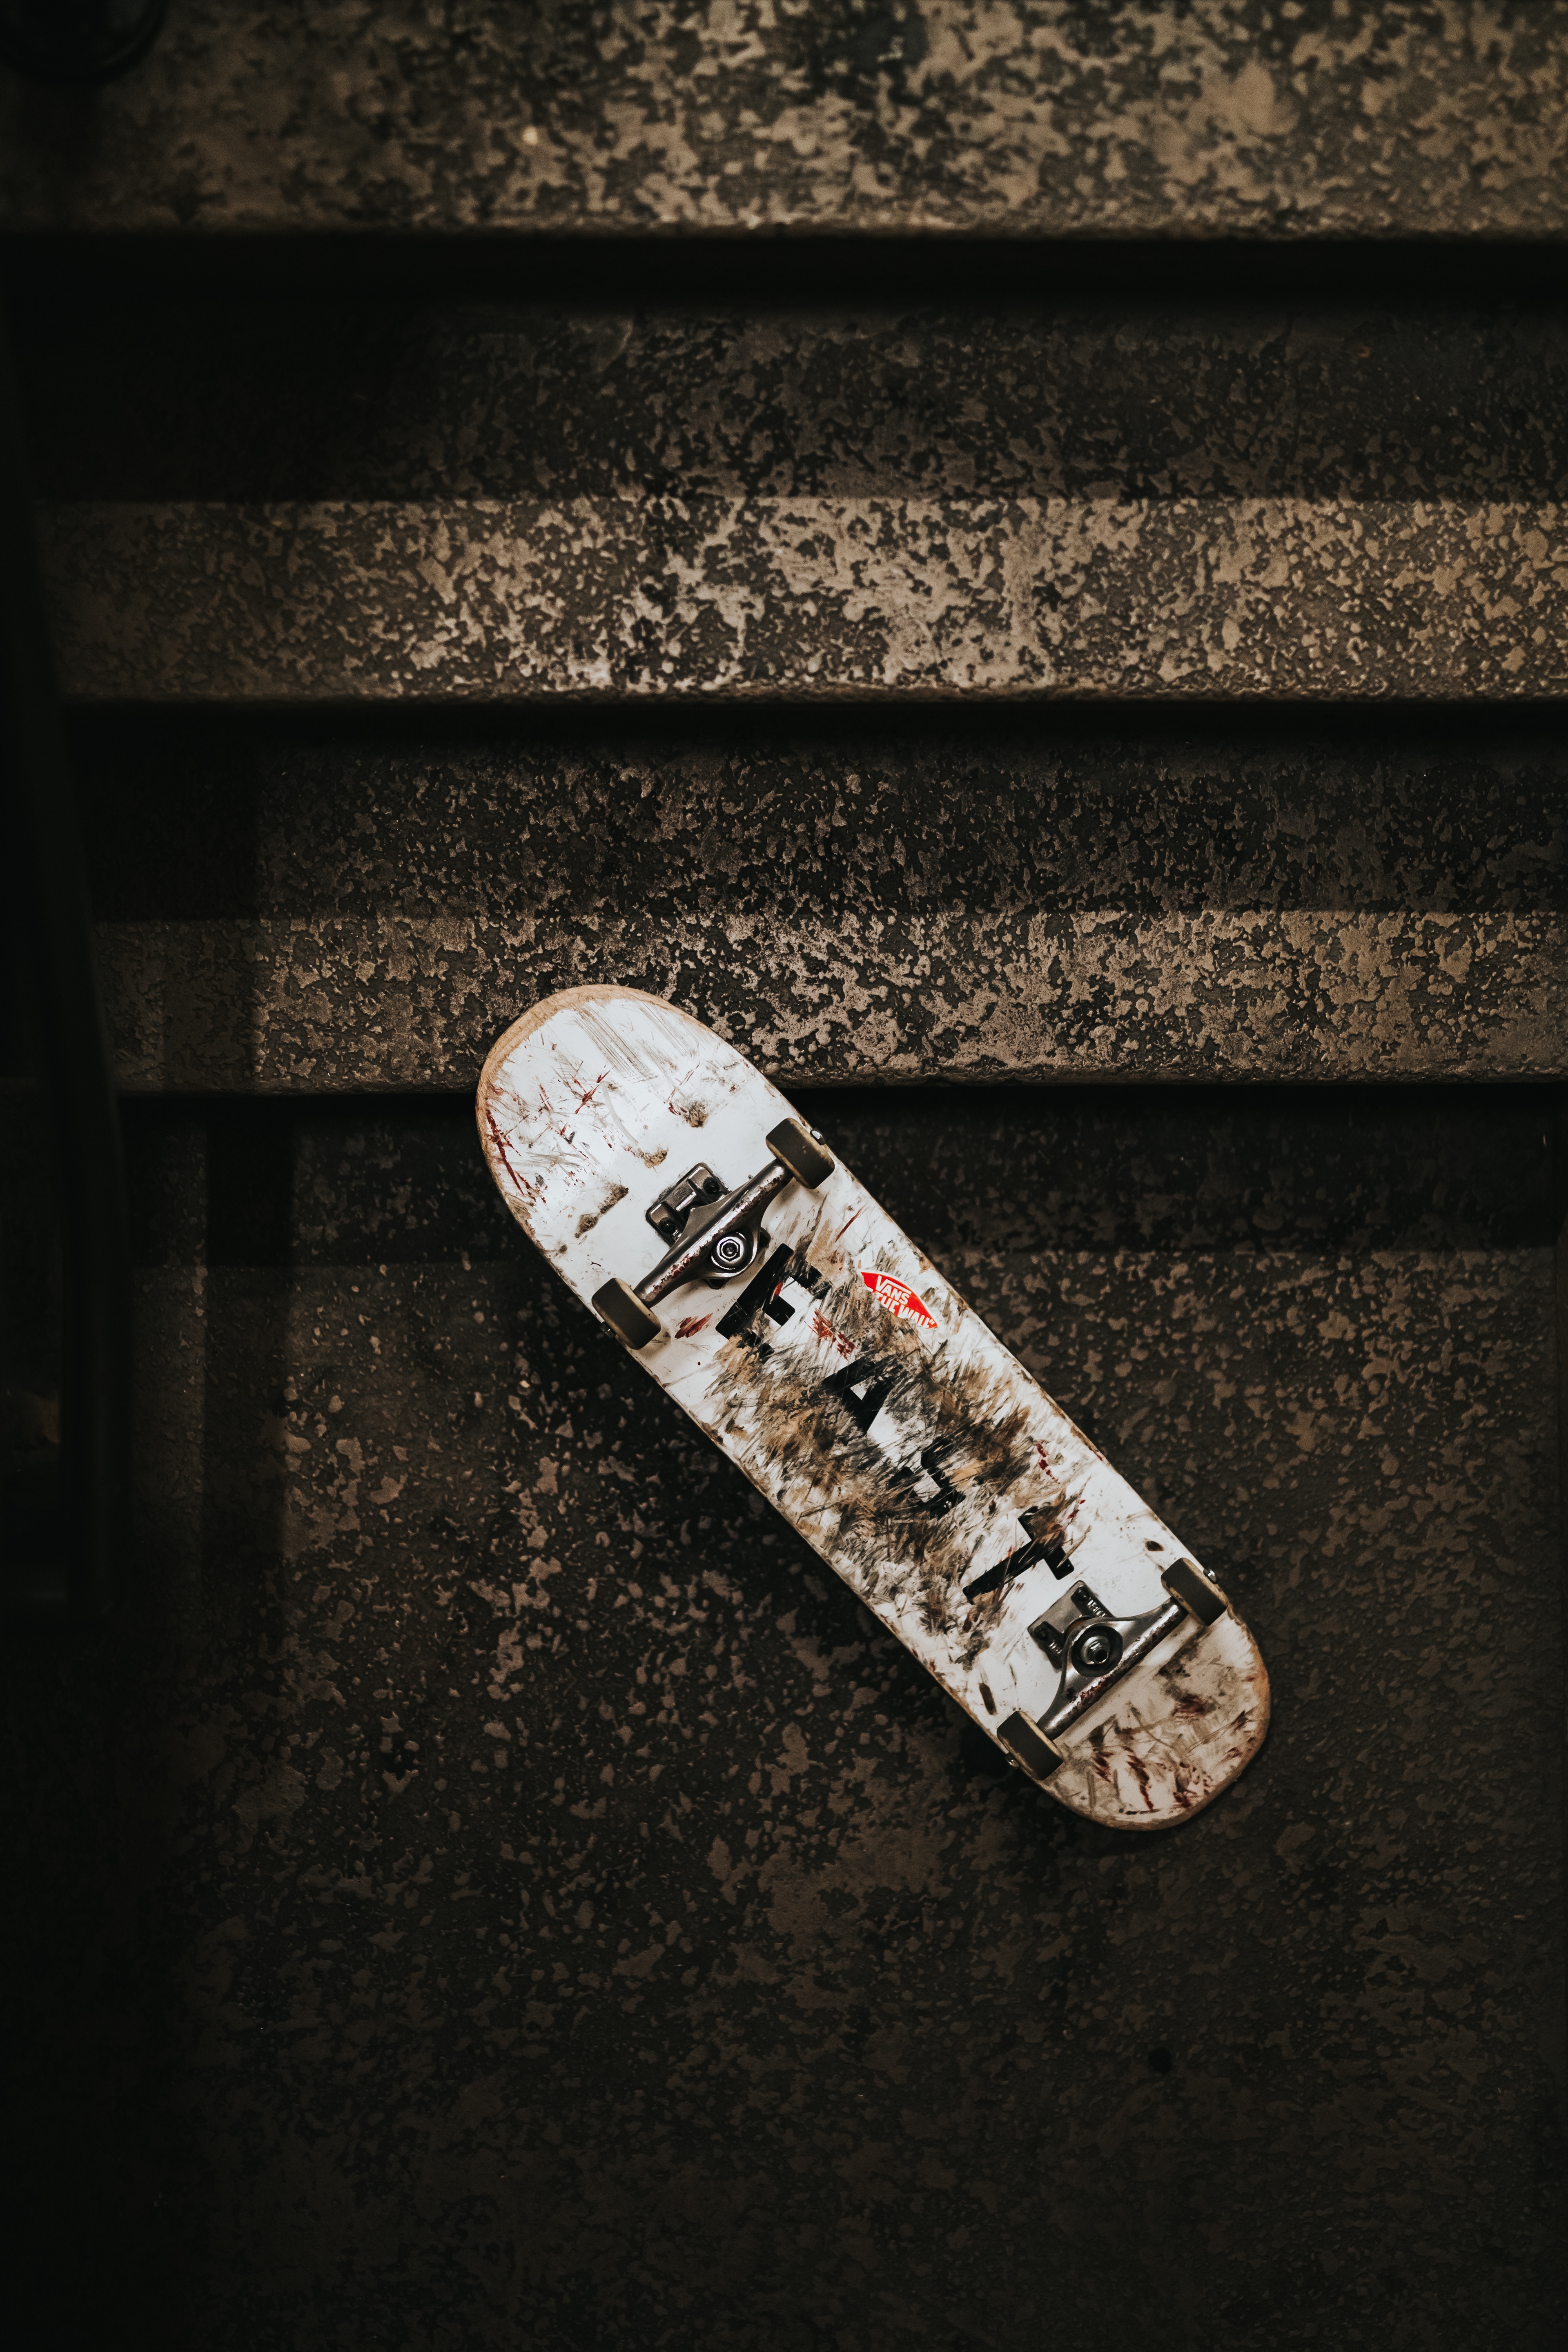 vertical wallpaper sports, lost, stairs, ladder, shabby, skateboard, wheels, dirty